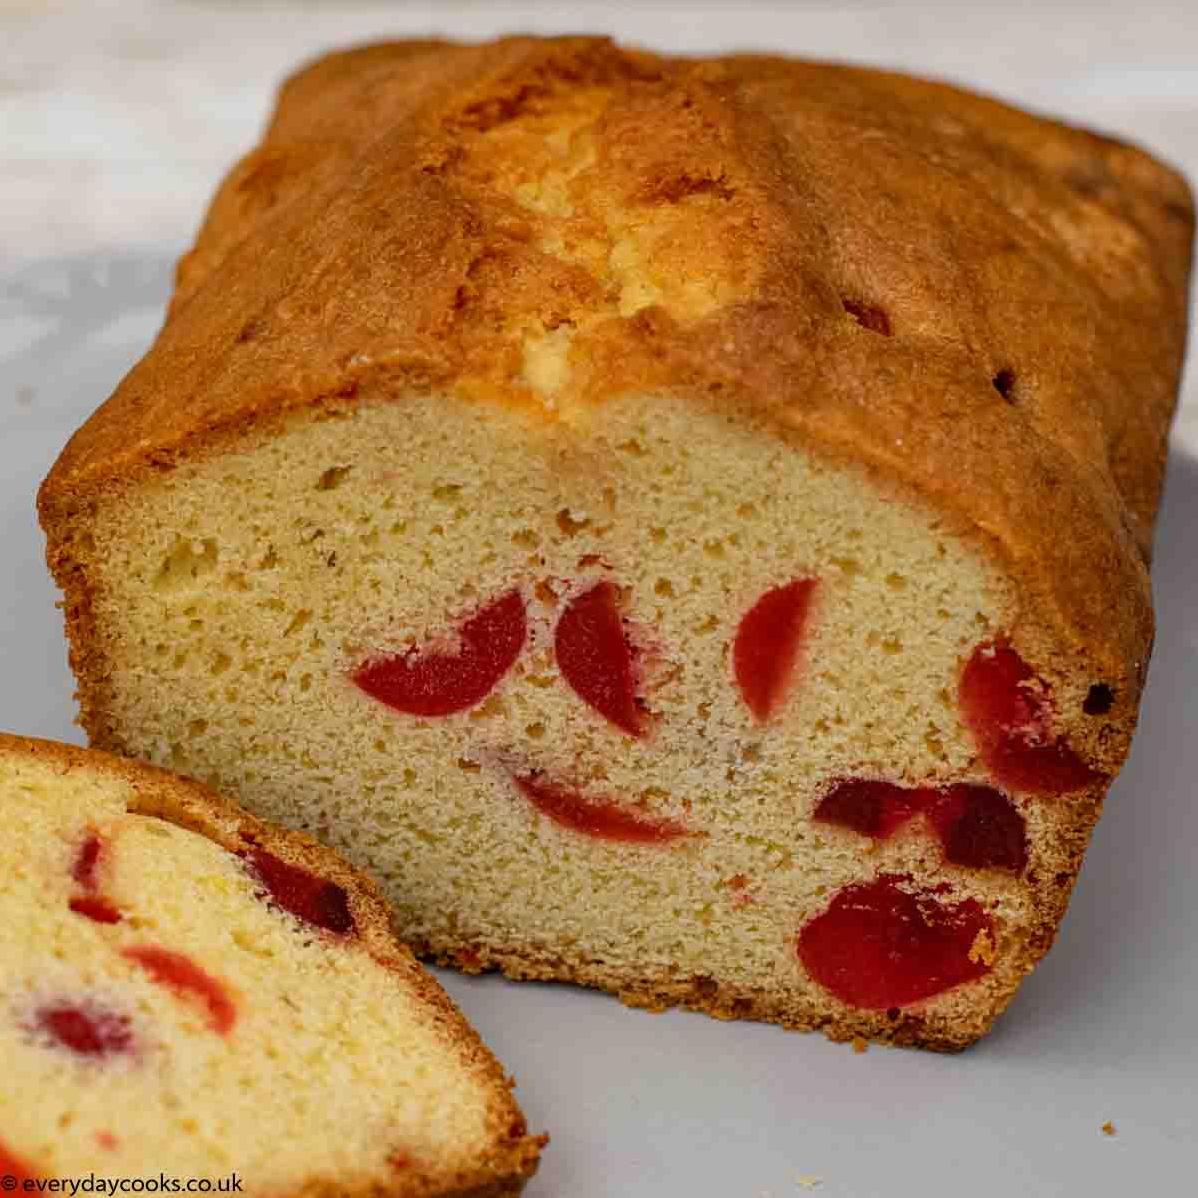  A classic loaf cake with a fruity twist, meet the Cherry Loaf Pound Cake